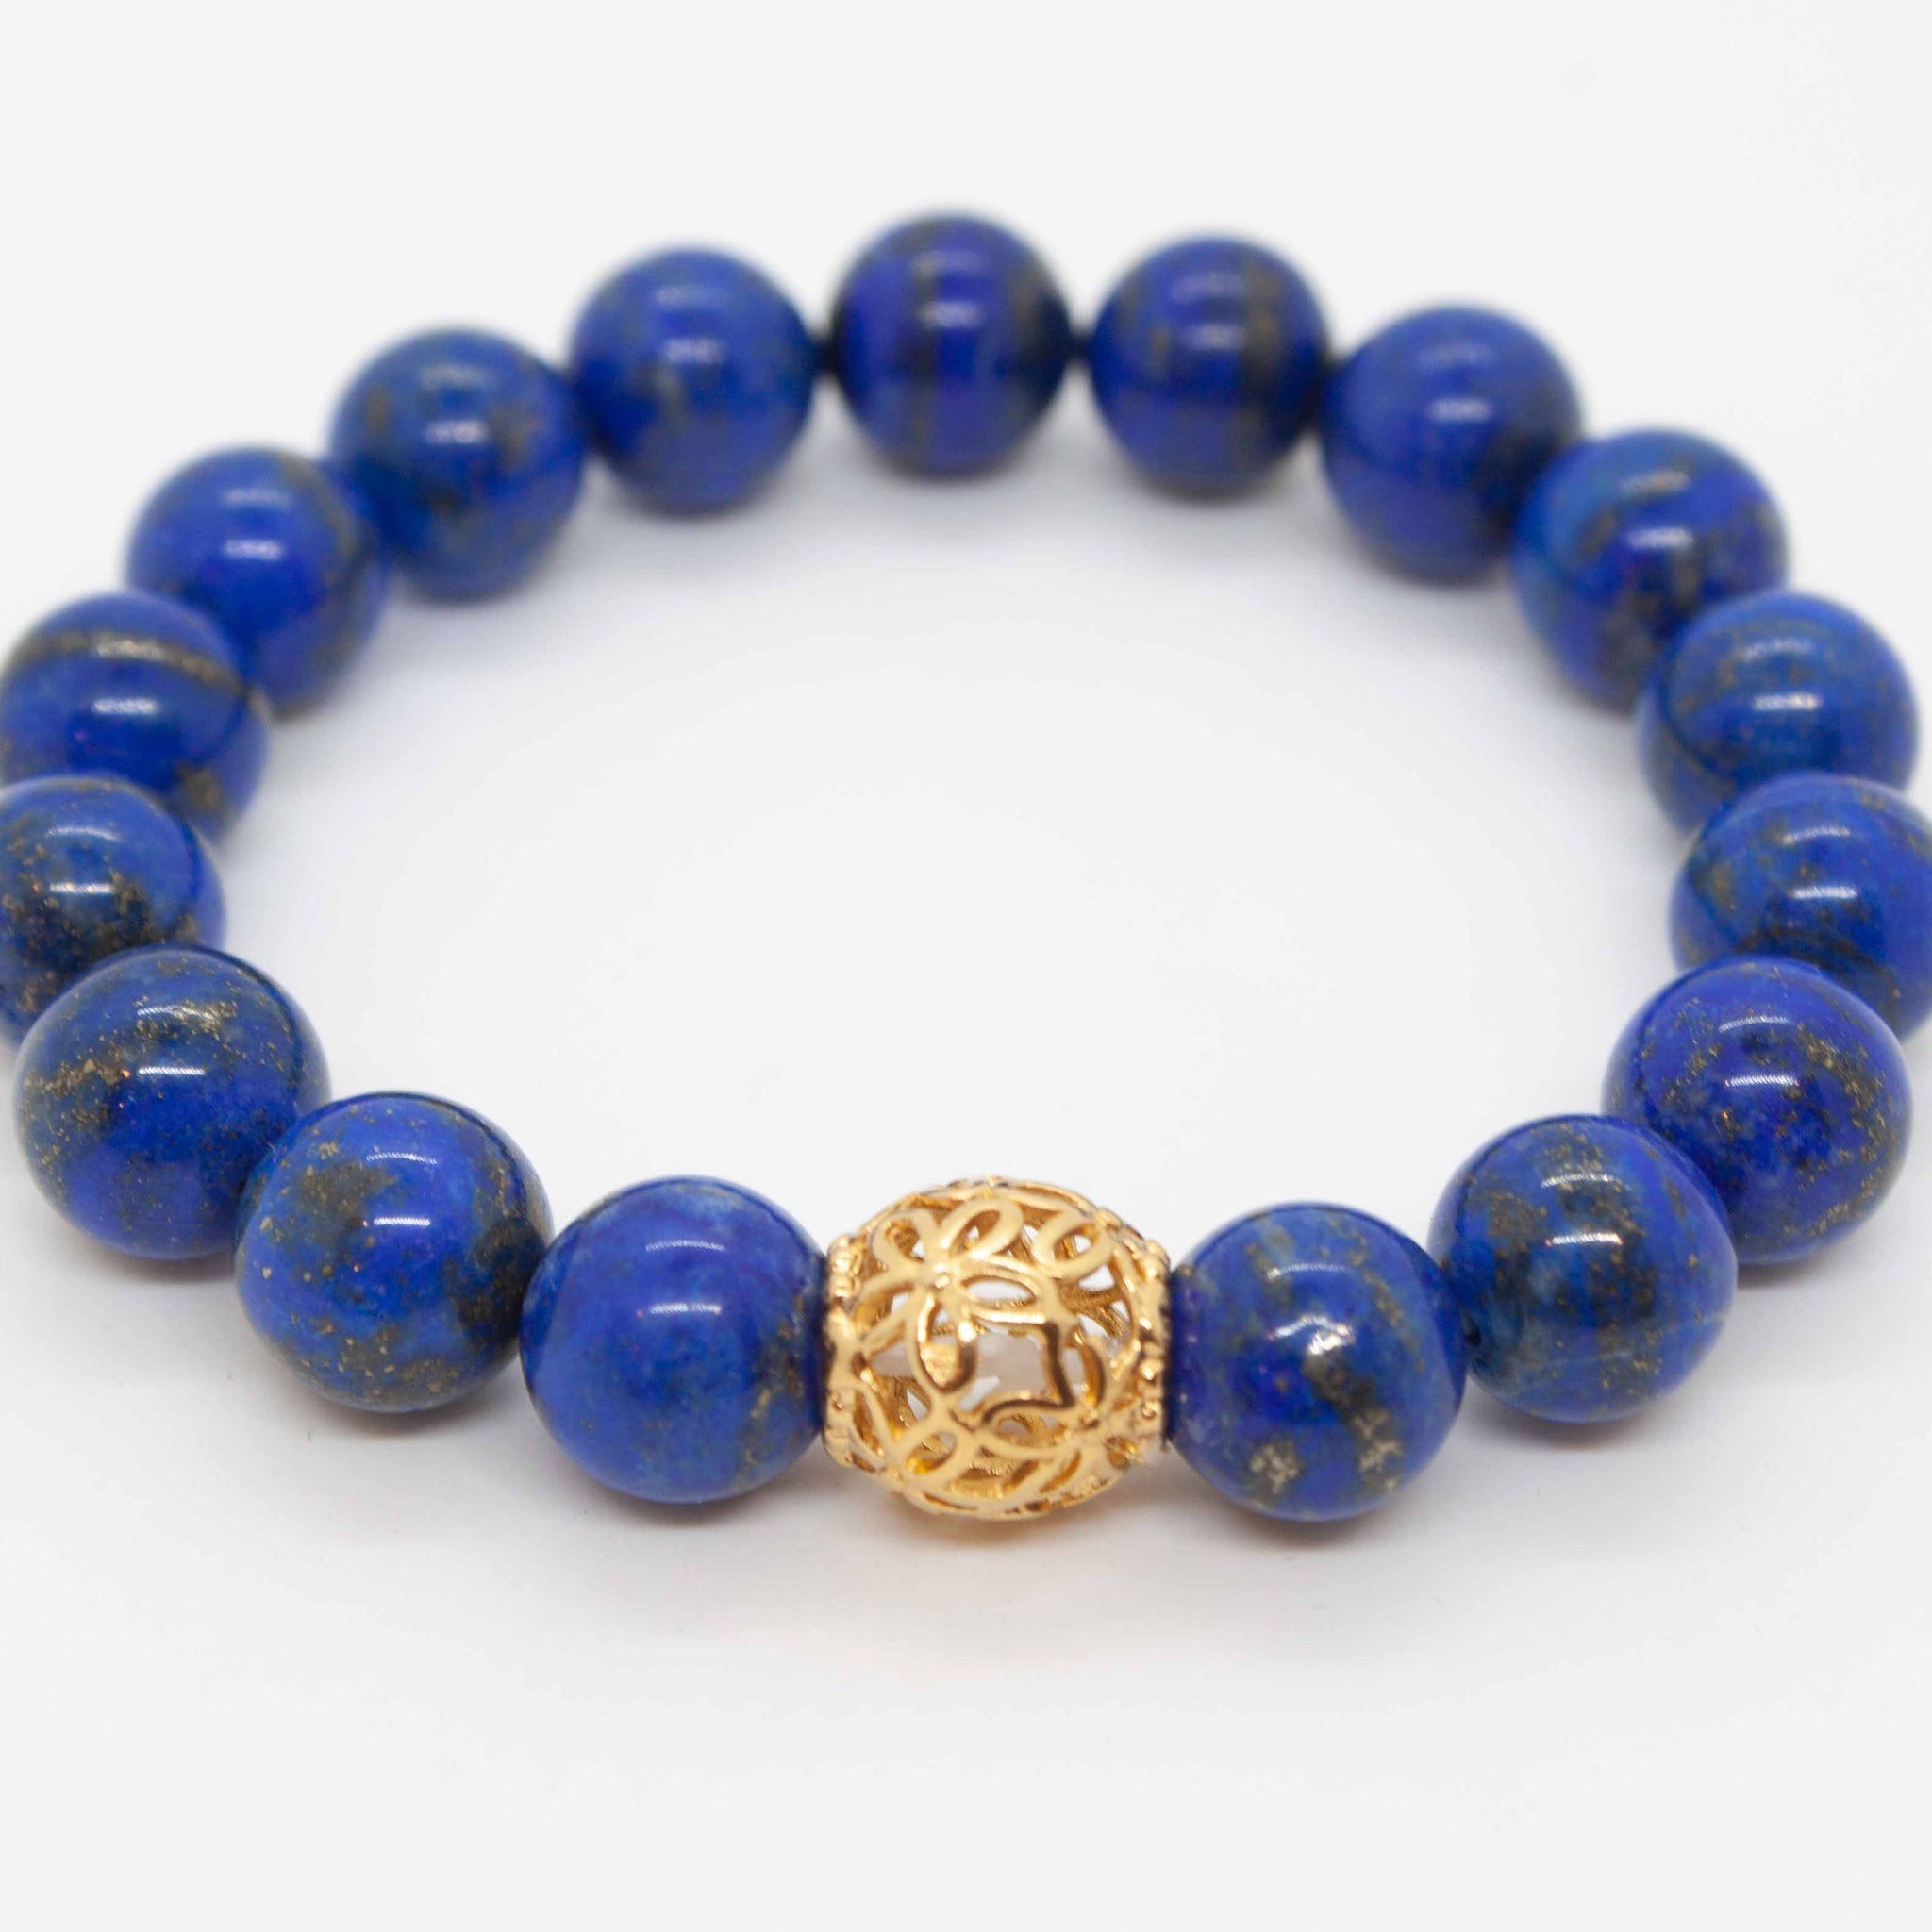 Calming and regal lapis lazuli and gold complement each other beautifully in this stunning bracelet. Want to connect to your royal presence? This bracelet is for you. Punch it up with our 14 karat gold filled bracelet! 7" lapis and gold beaded bracelet double strung on elastic silk thread (want a different size? send us an email!). 14kt gold filled beaded bracelet, also double strung on elastic silk thread. Made in Toronto by kp jewelry co.